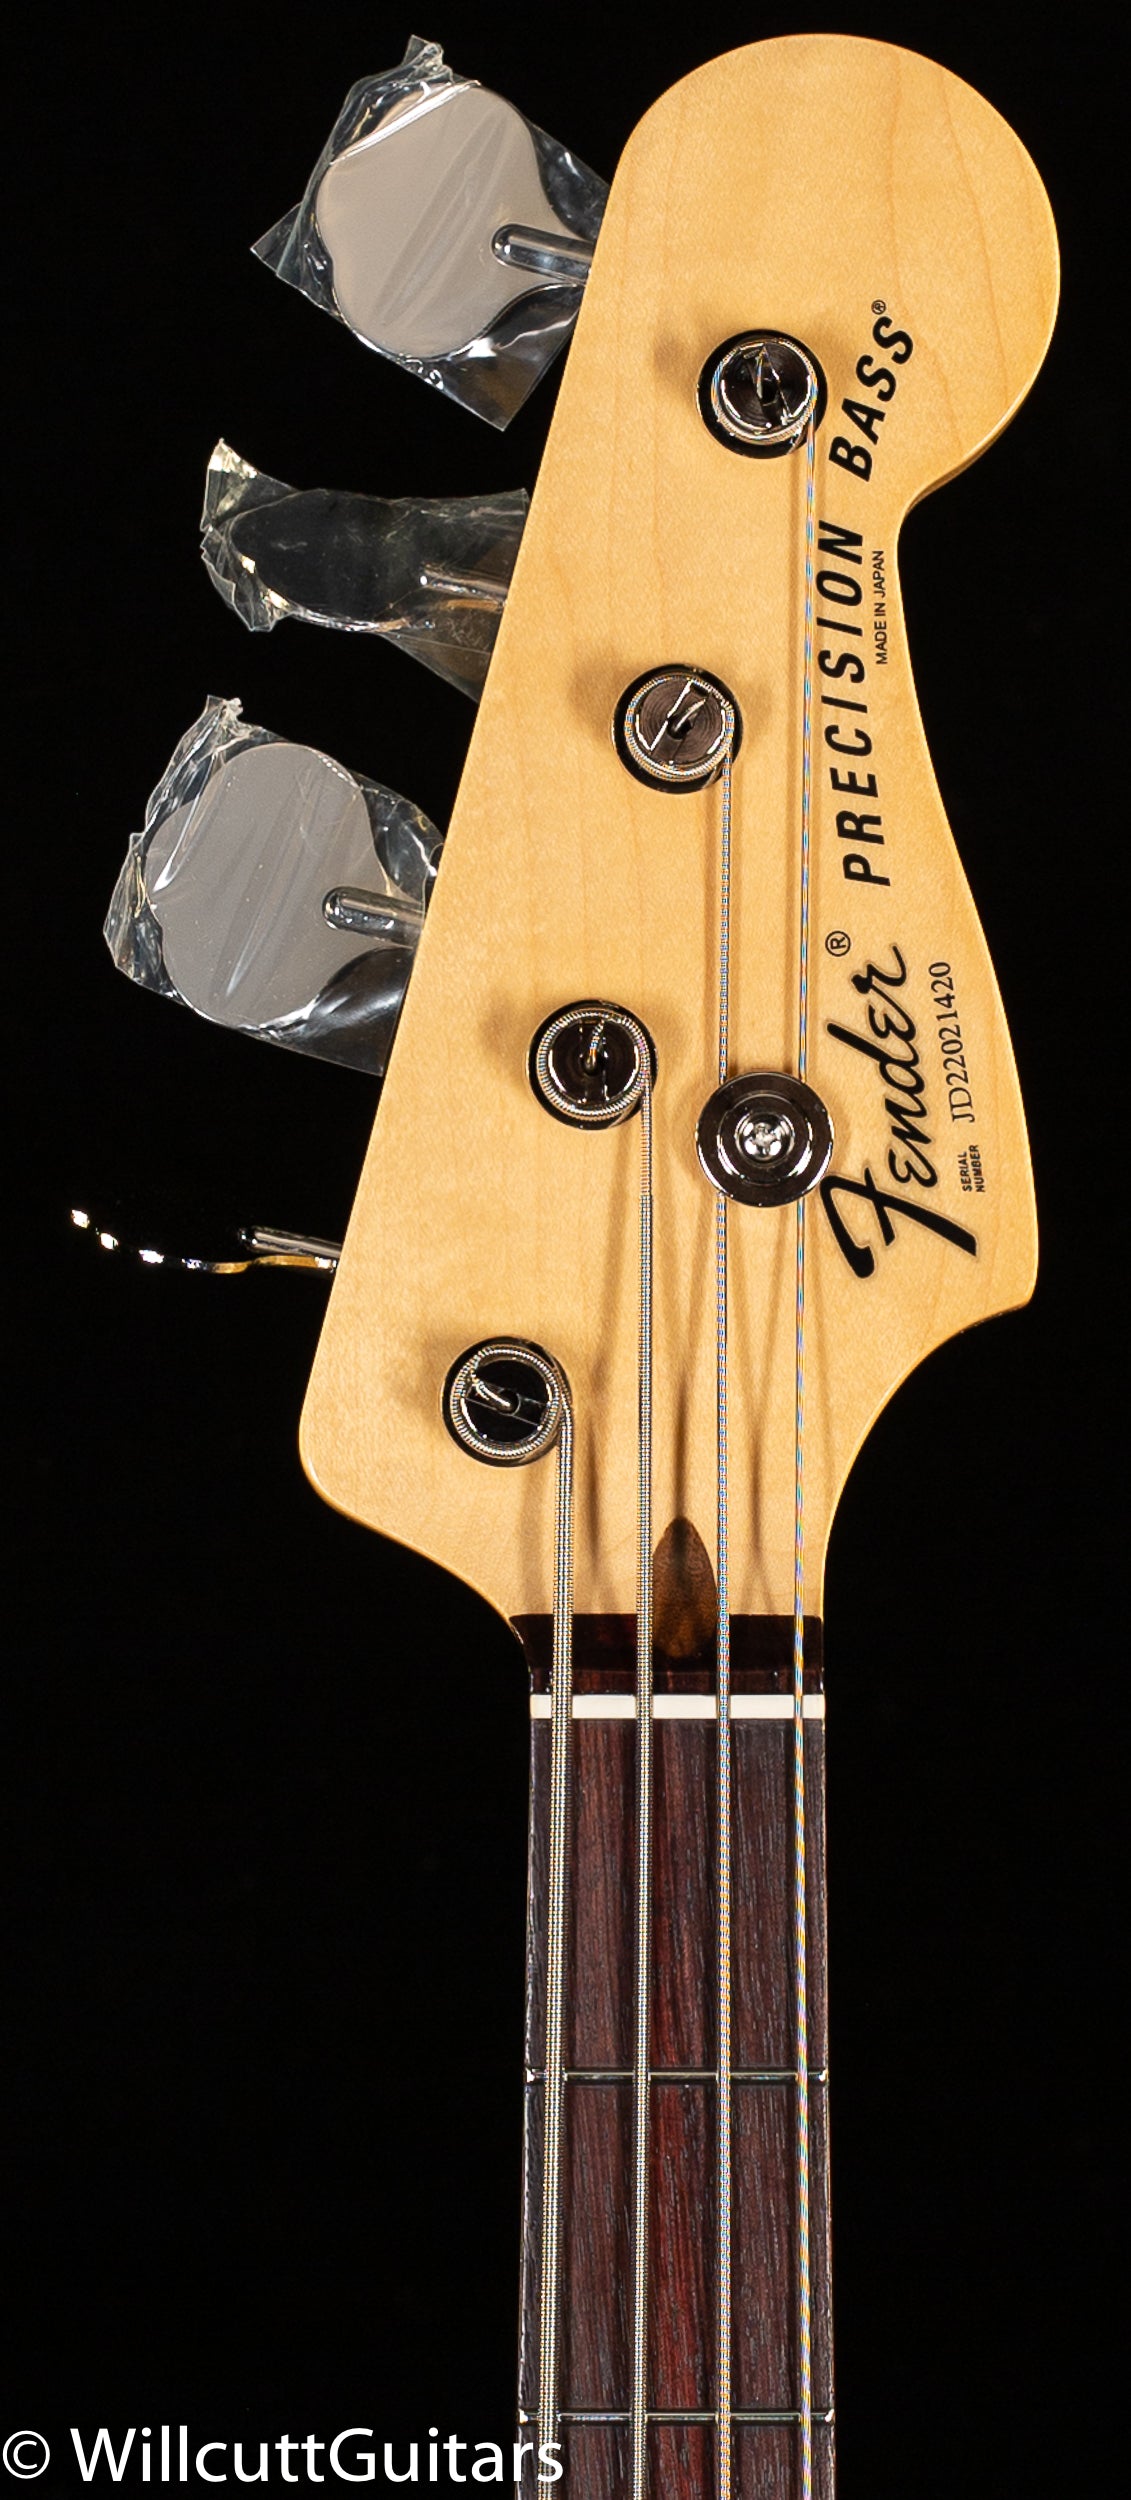 Fender Made in Japan Limited International Color Precision Bass